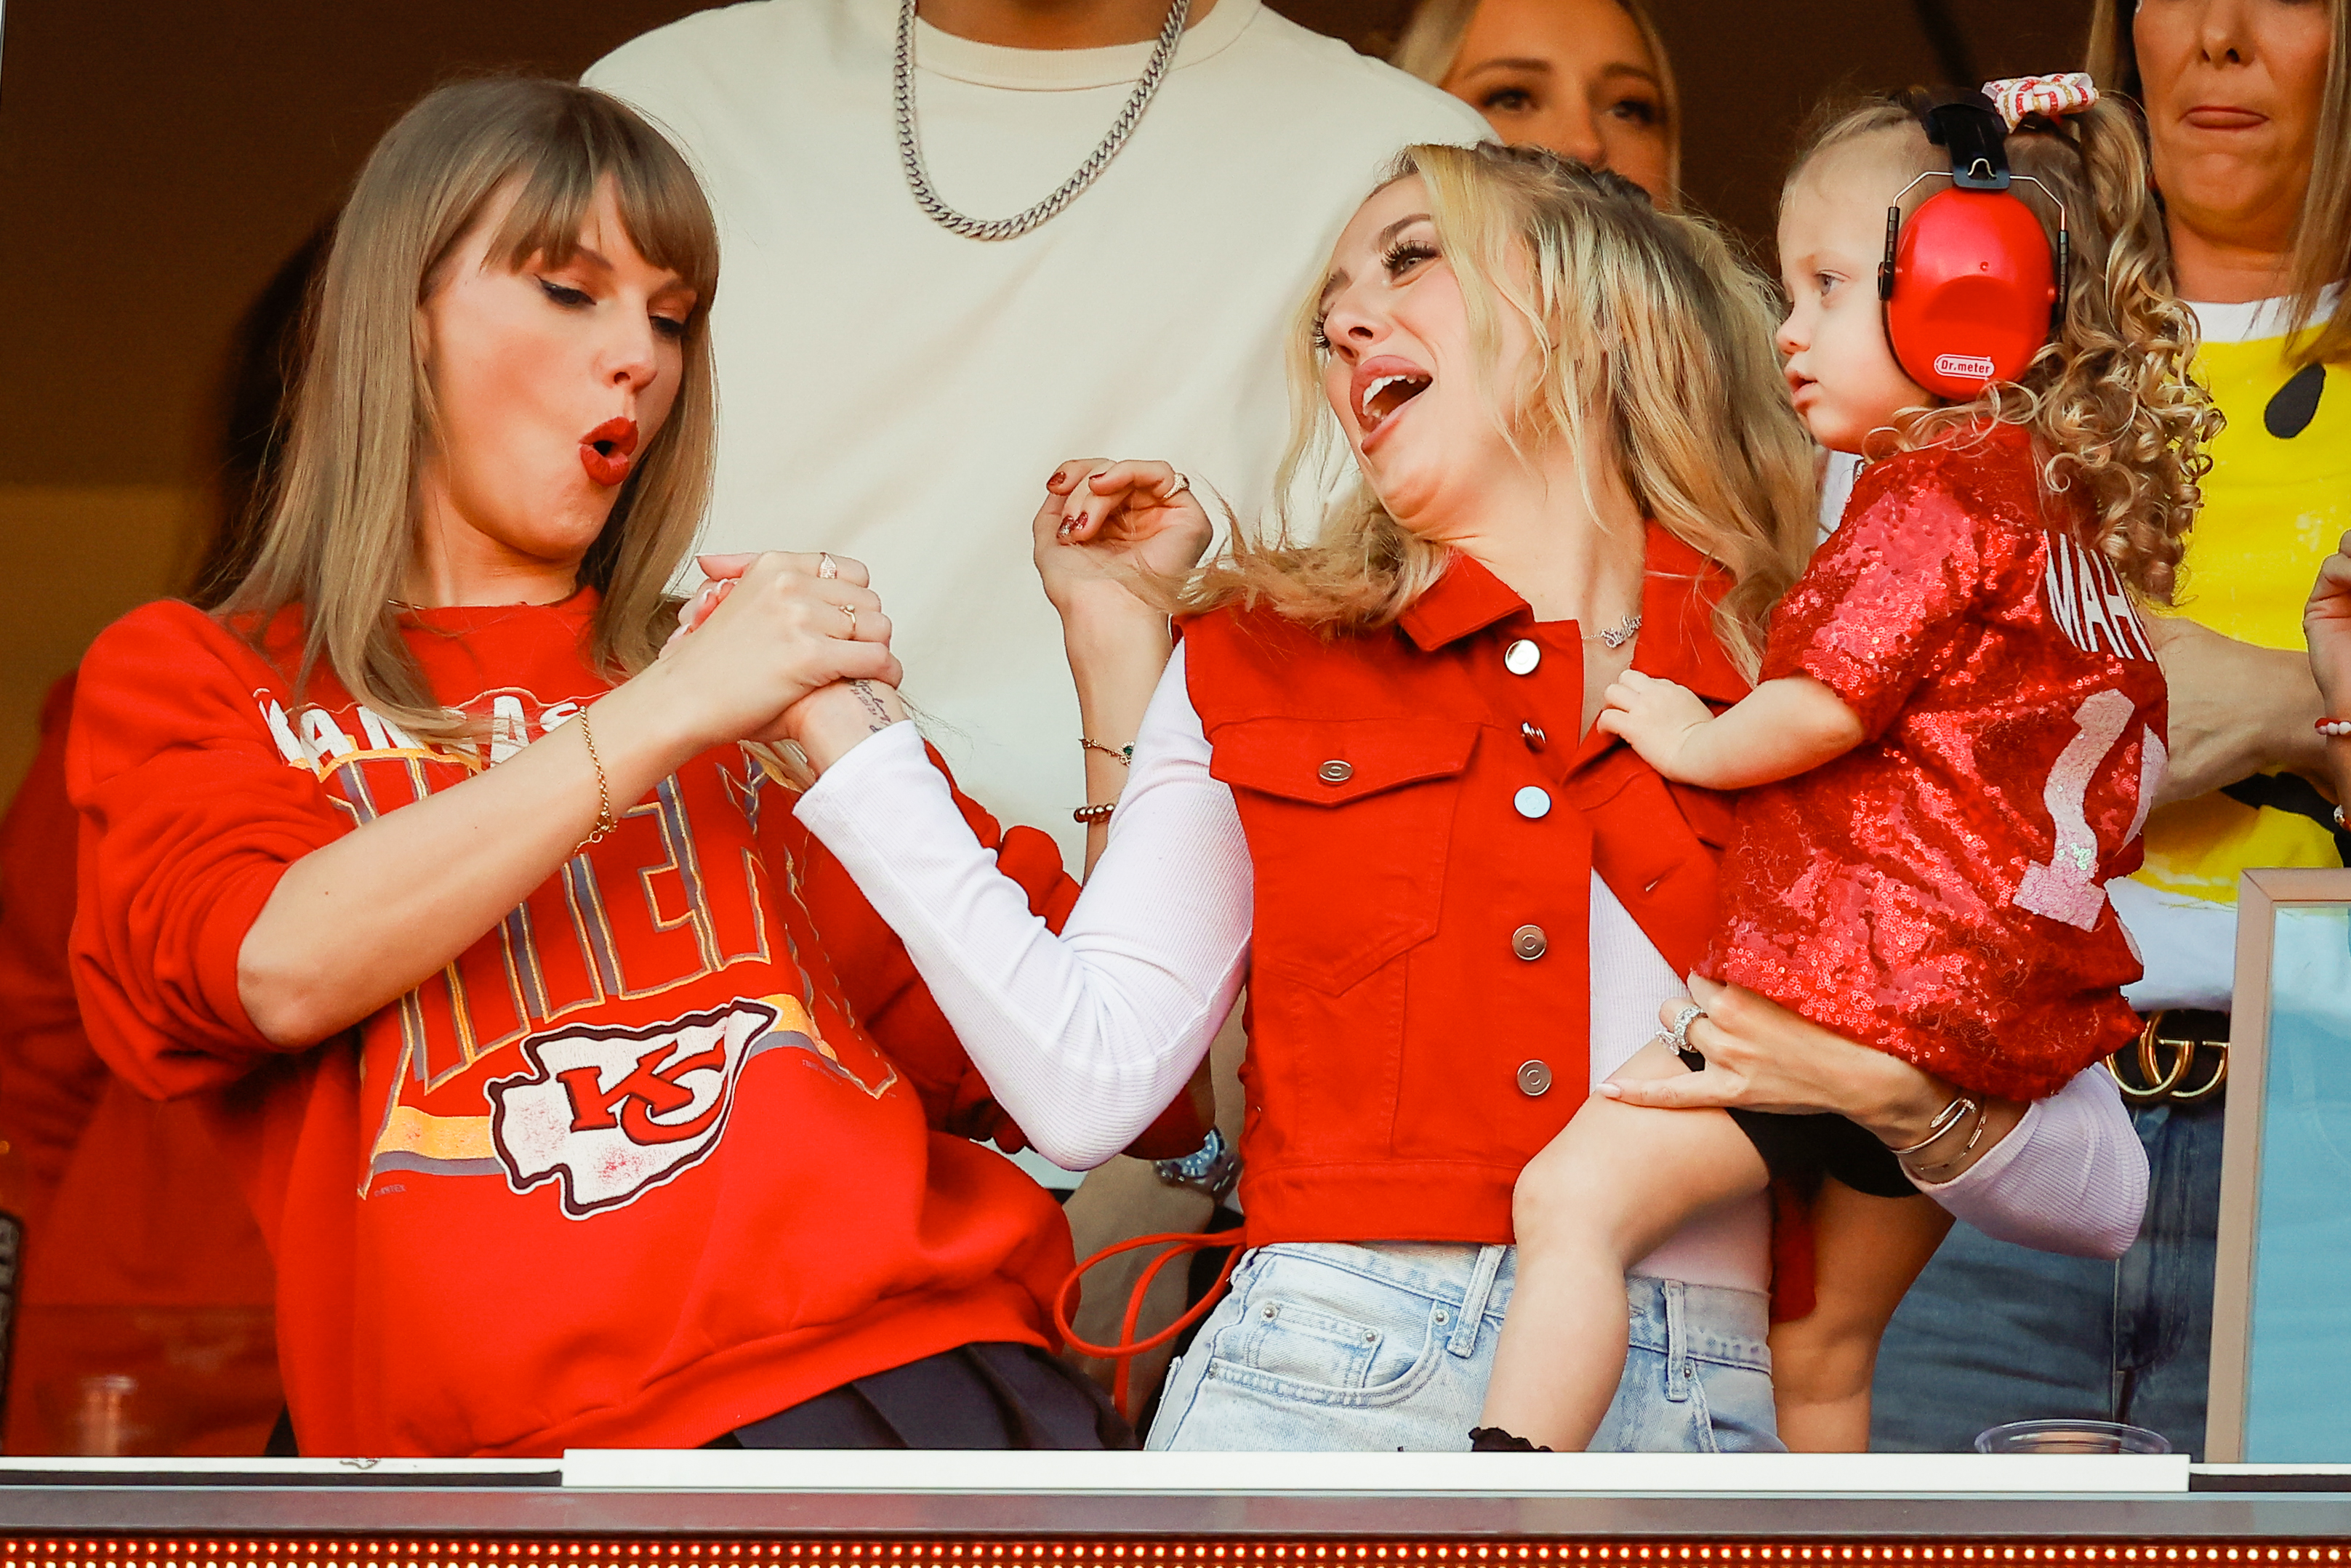 Taylor Swift hosted a Chiefs watch party with Travis Kelce teammate WAGs